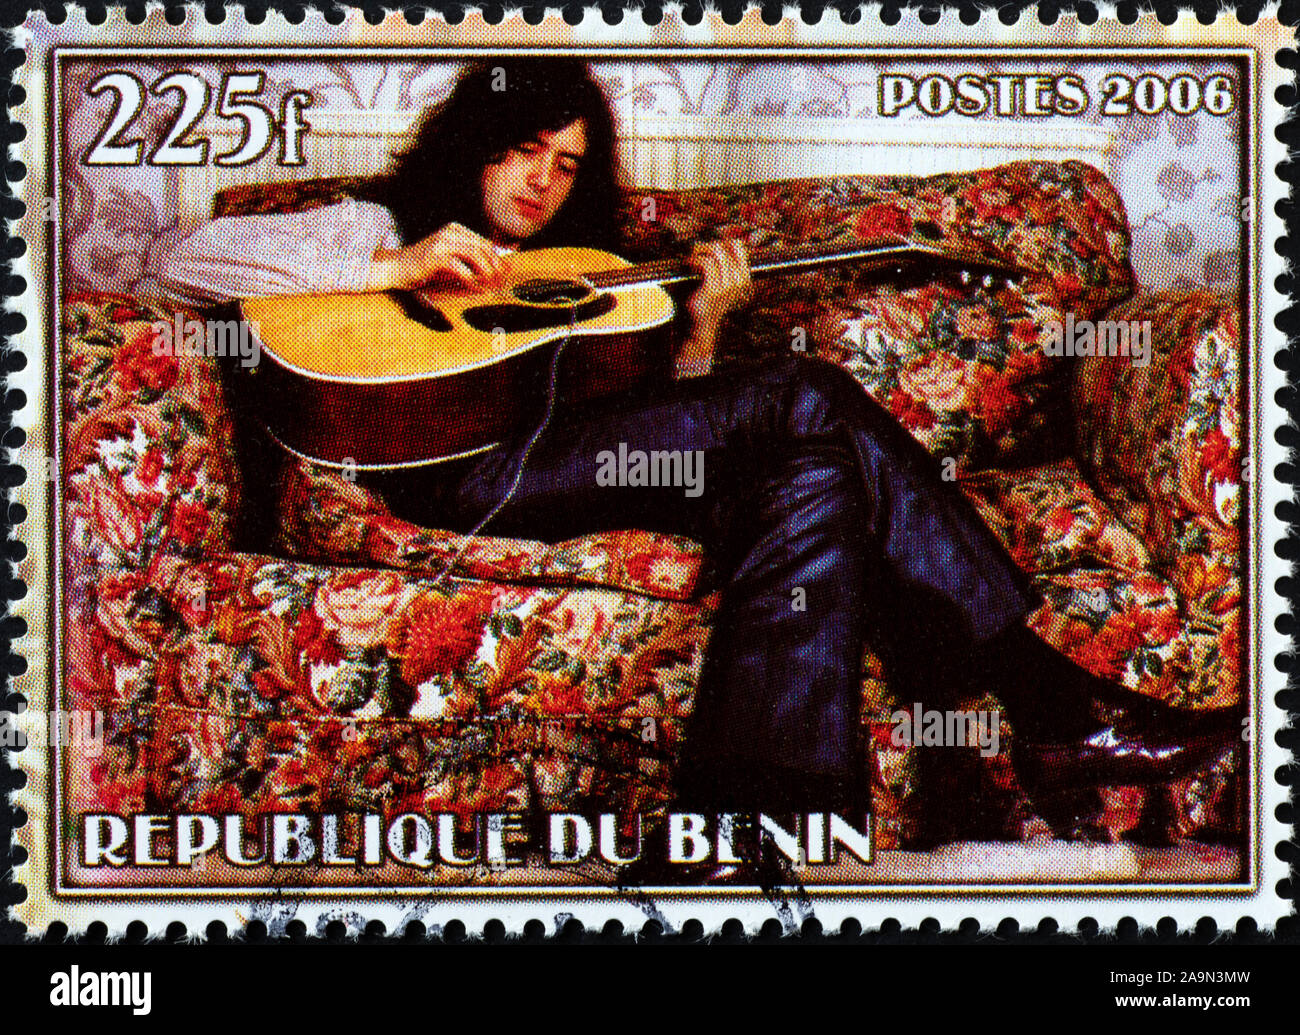 Jimmy Page playing guitar on postage stamp Stock Photo